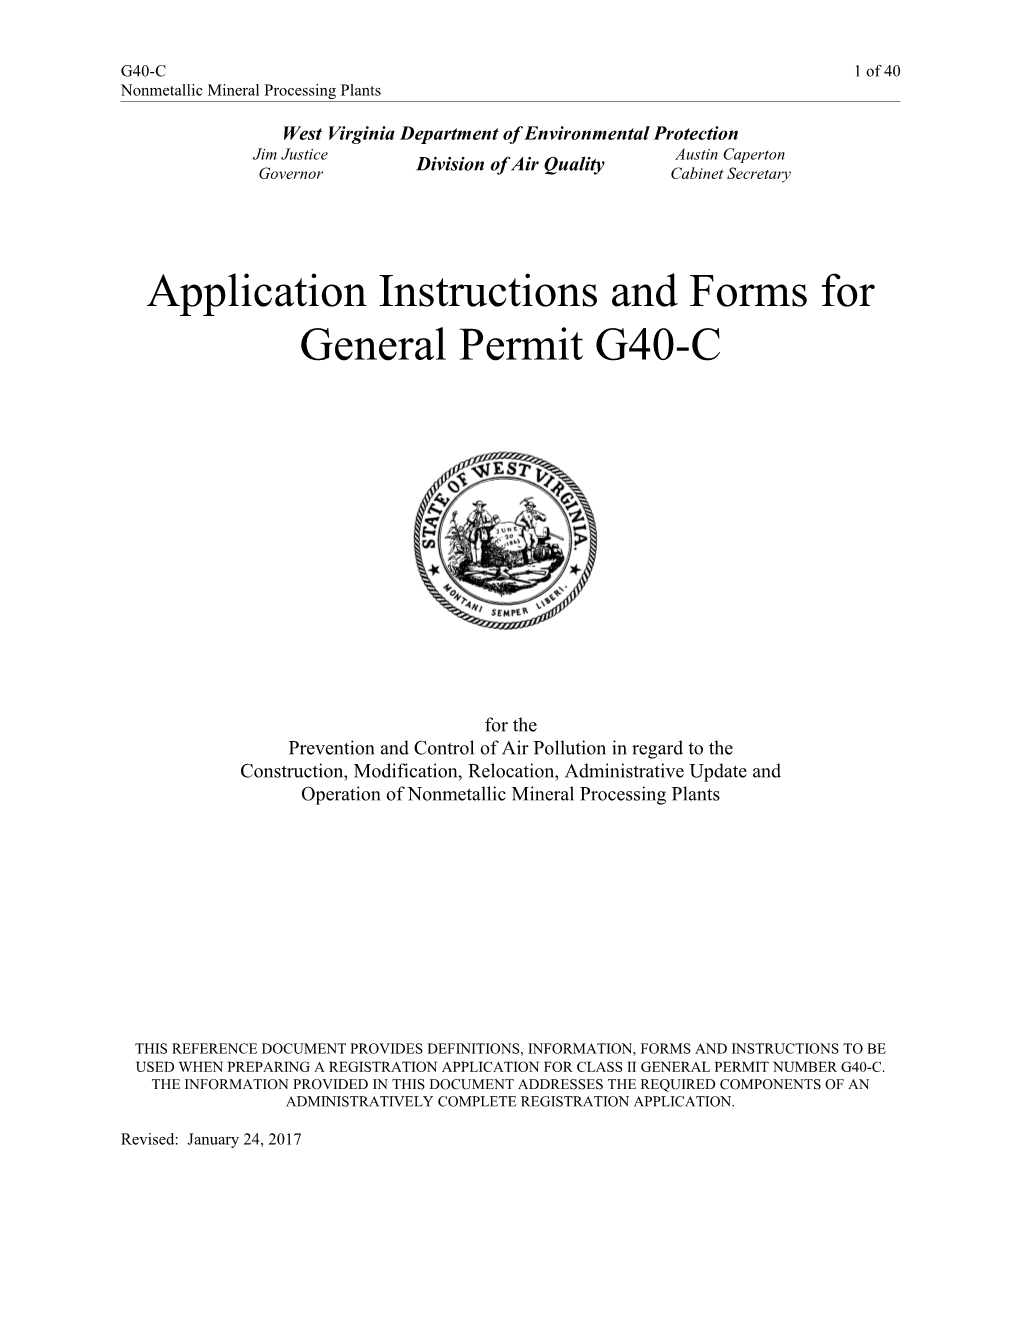 Application Instructions and Forms for General Permit G40-C